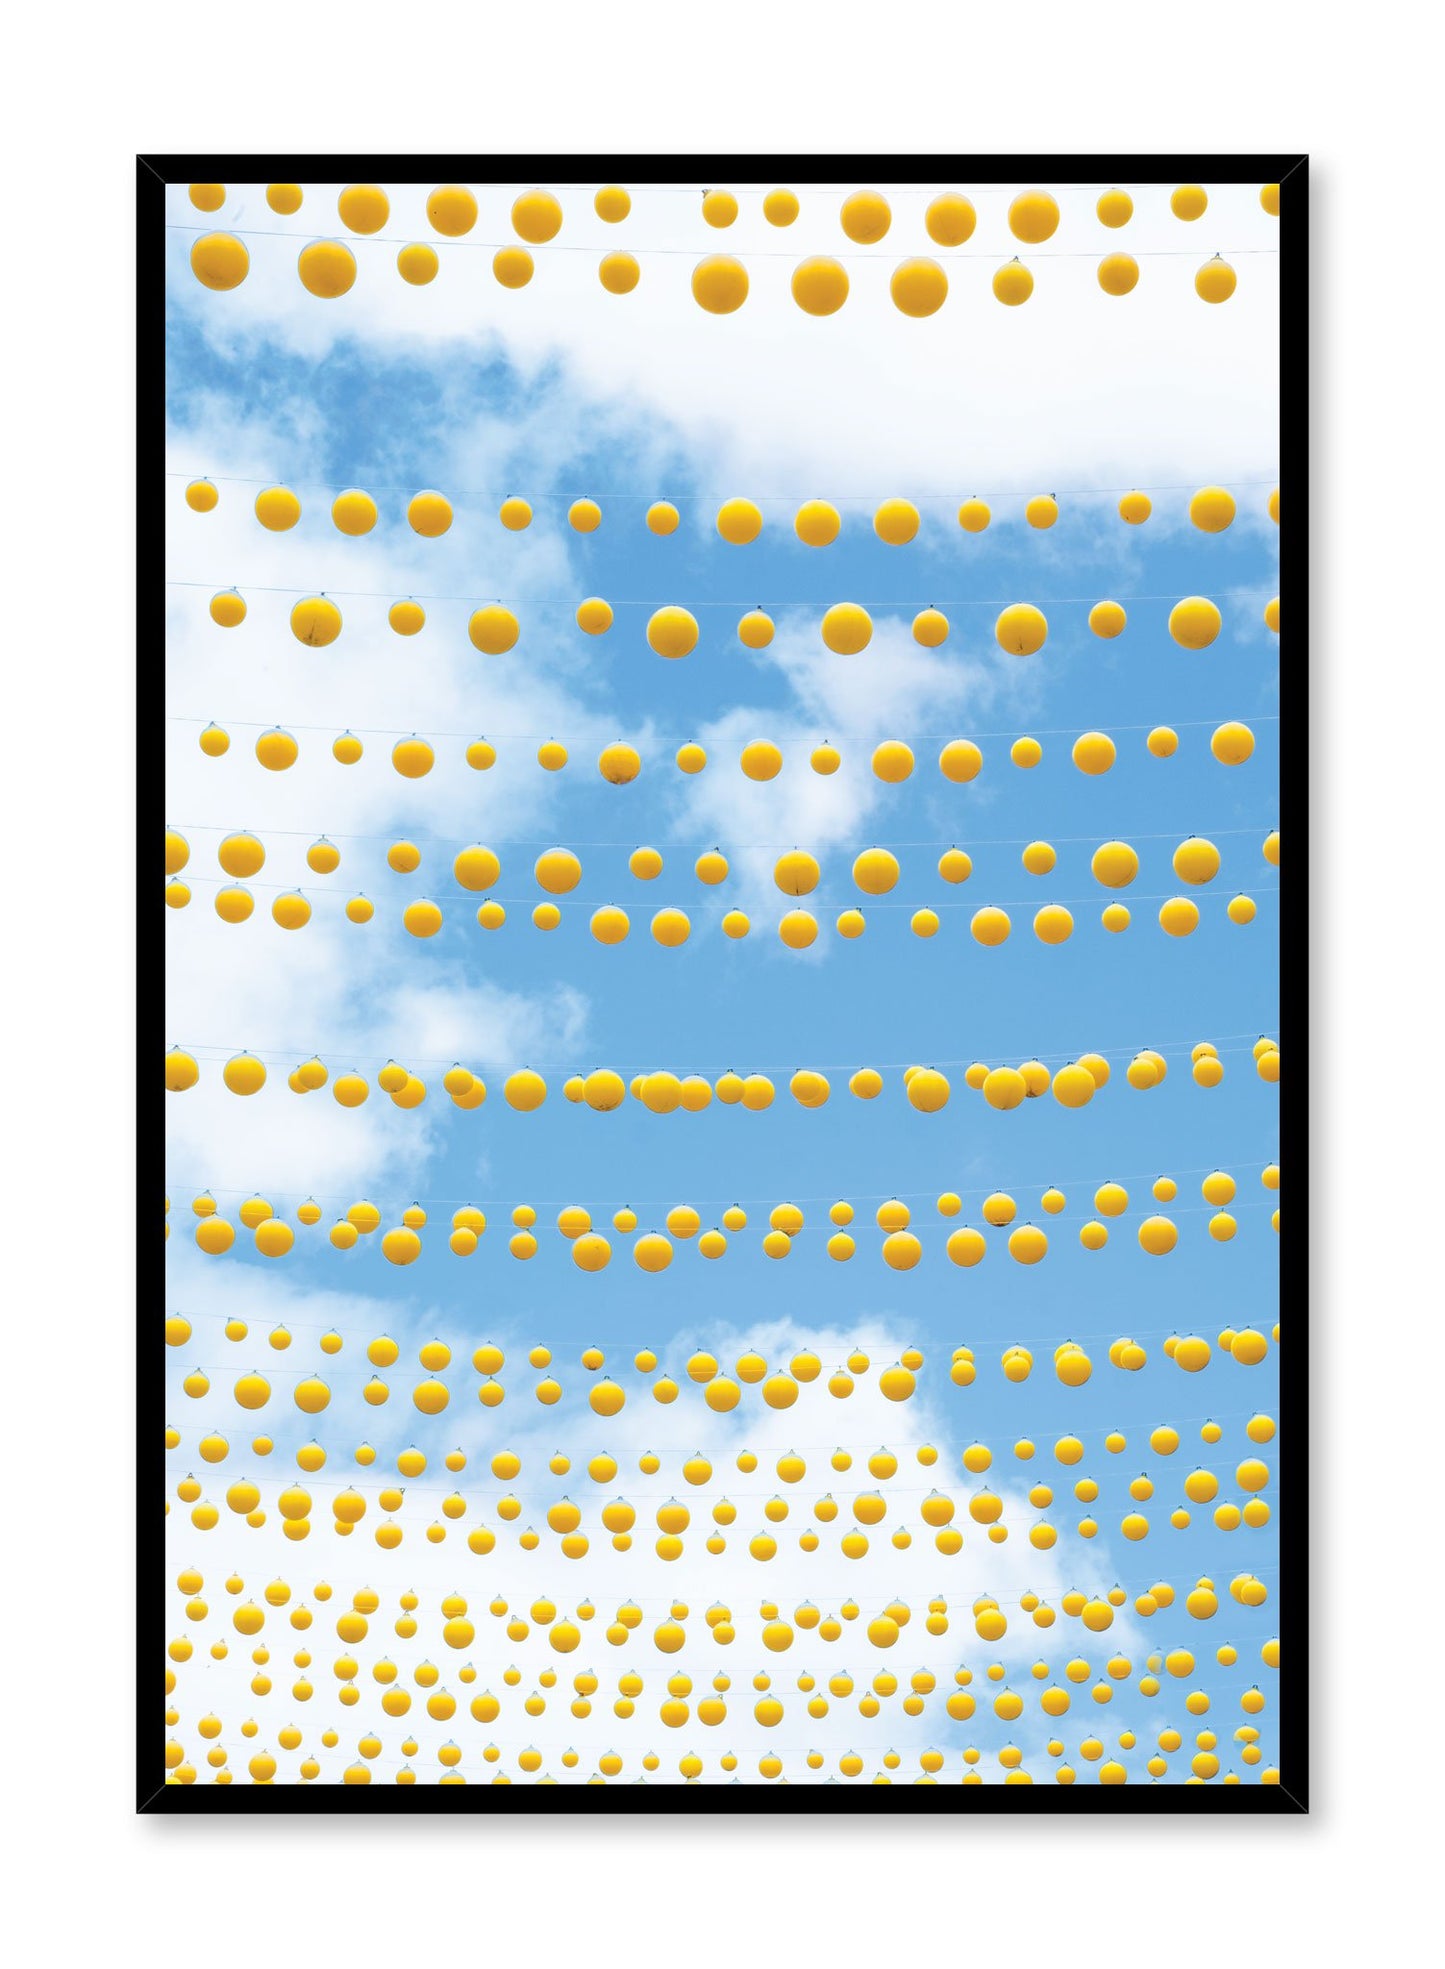 Minimalist design poster by Opposite Wall with canopy of ornament balls photography